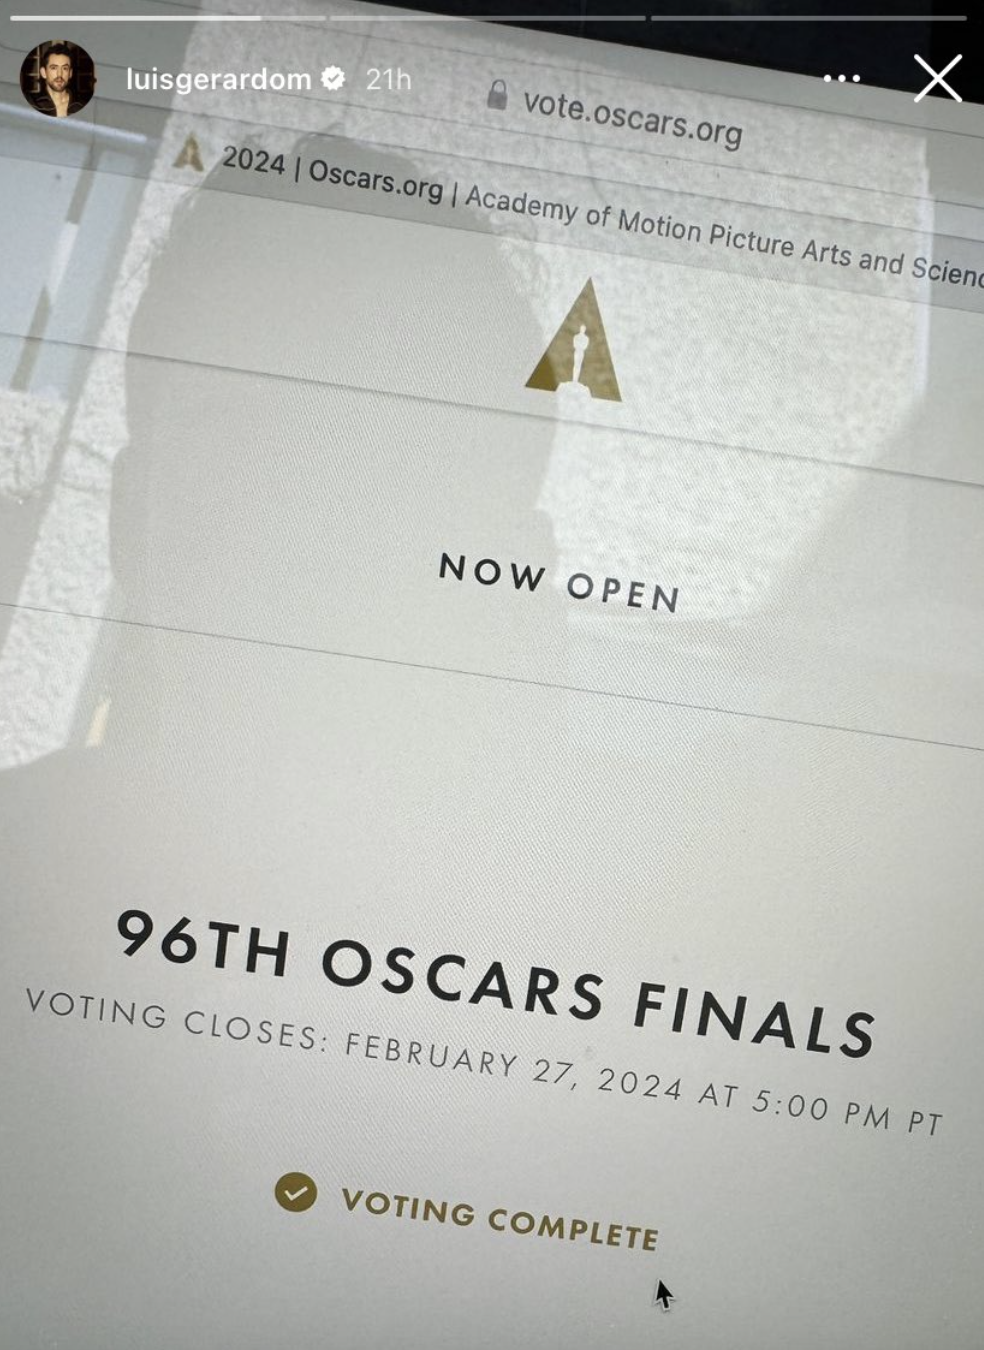 Screenshot of Oscar voting webpage announcing &#x27;96th Oscars Finals Voting Now Open, closes February 27, 2024 at 5 PM PT&#x27;